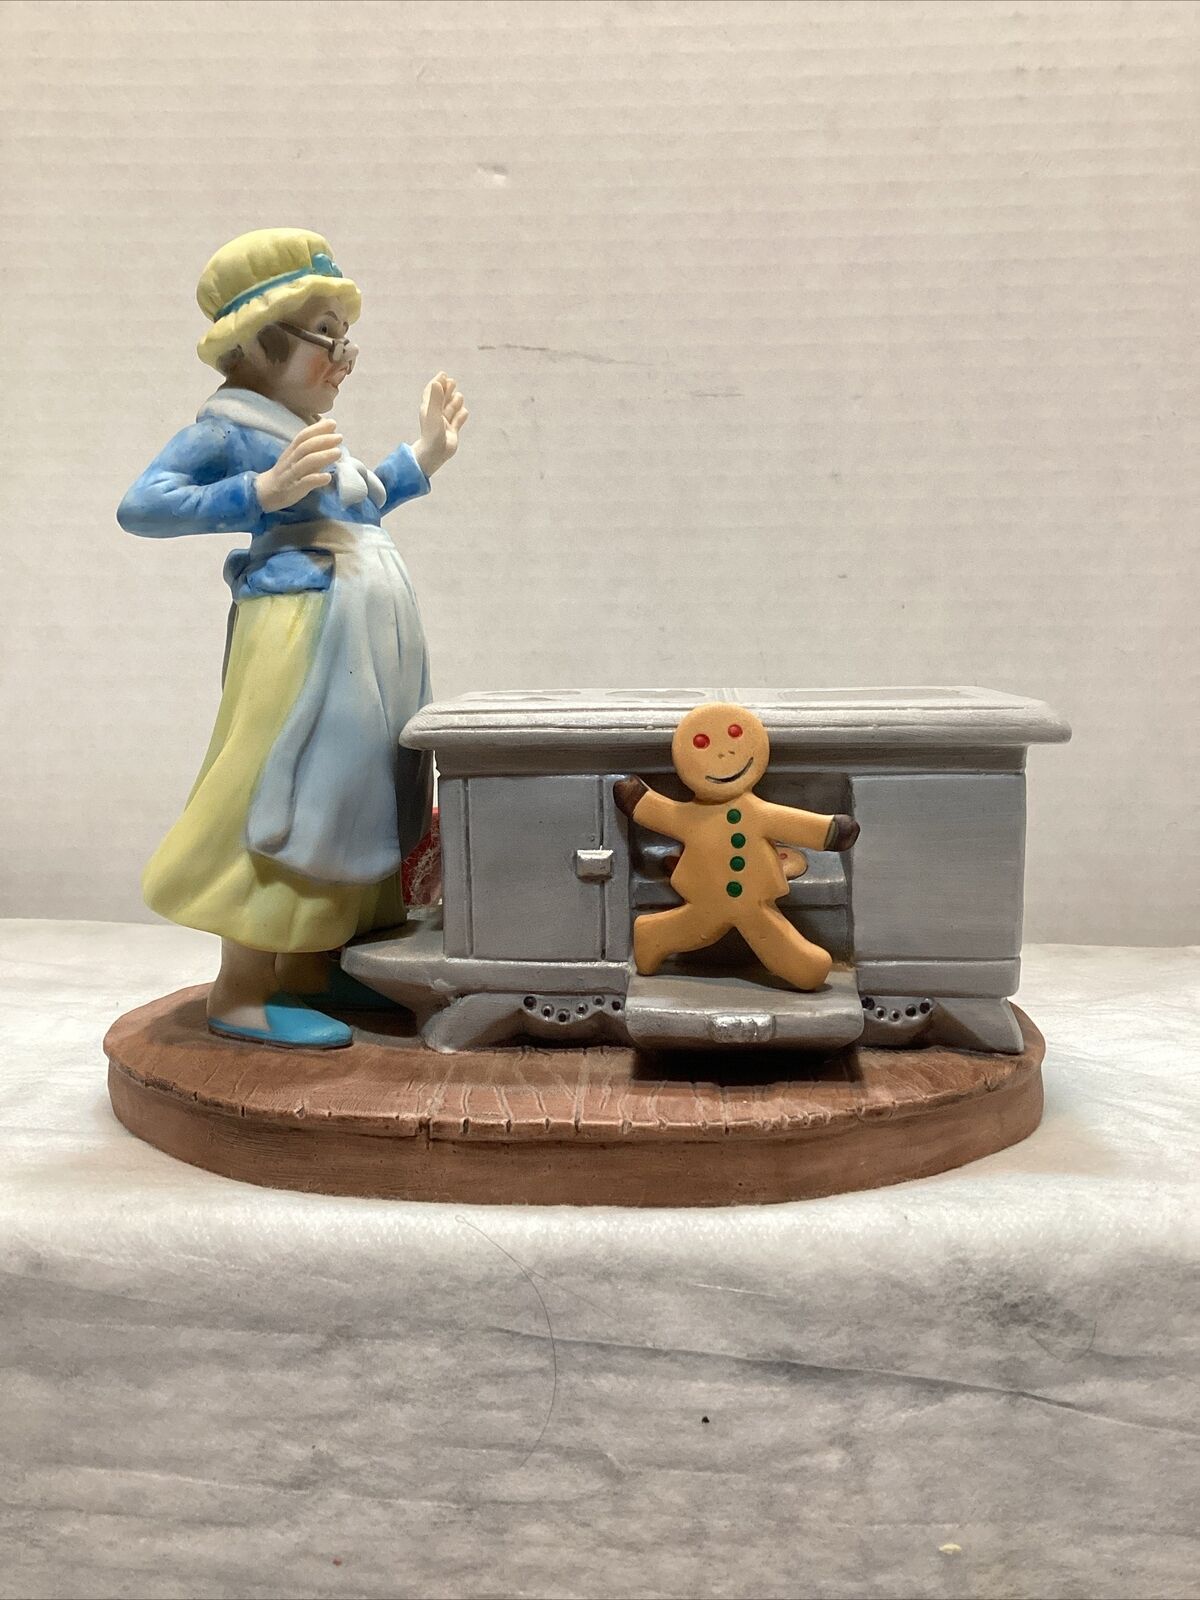 The gingerbread man from the Danbury mint 12 fairy tales figurine collection